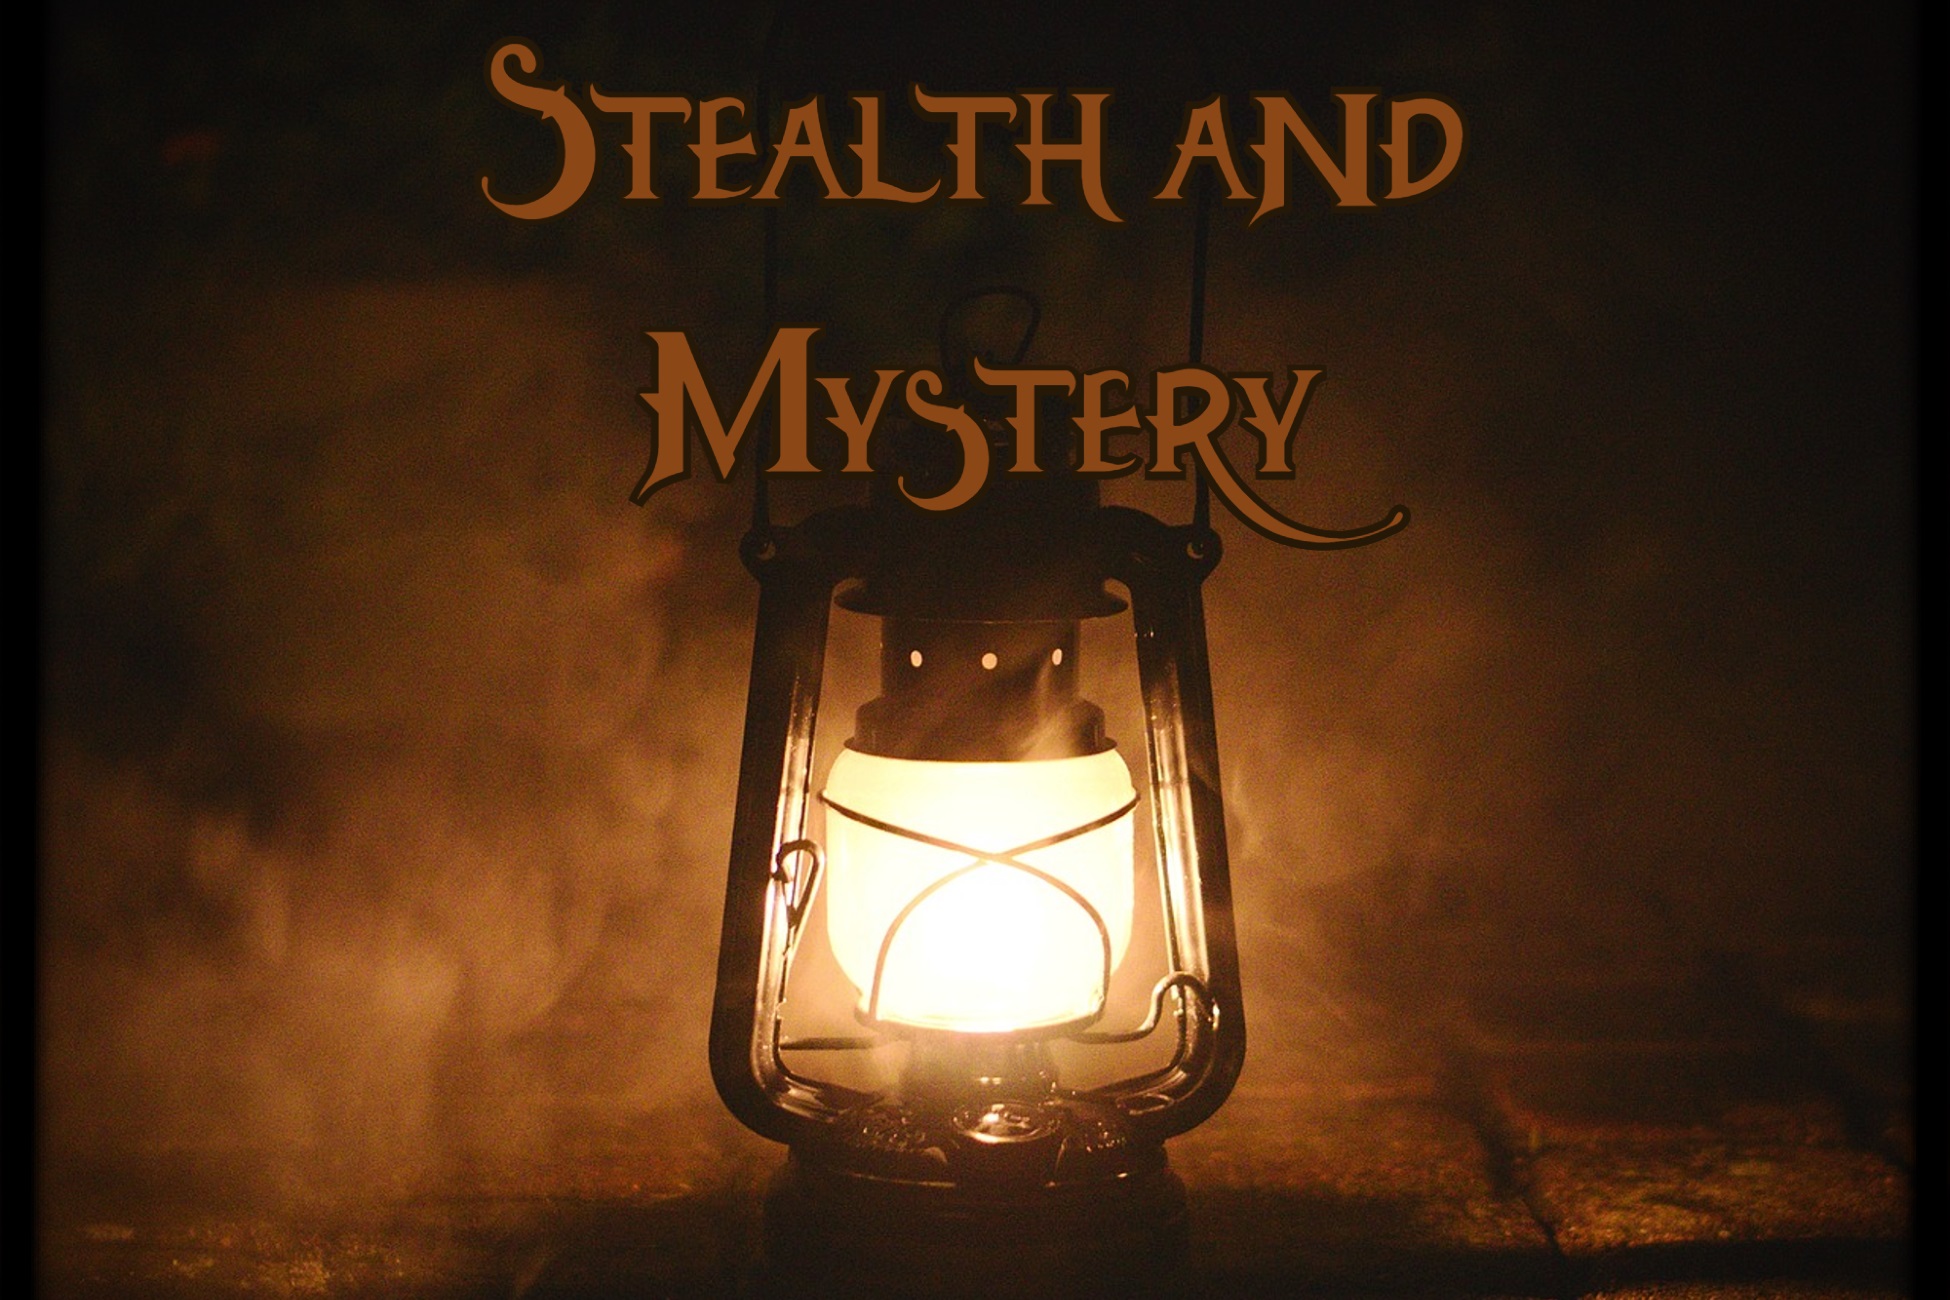 Stealth and Mystery